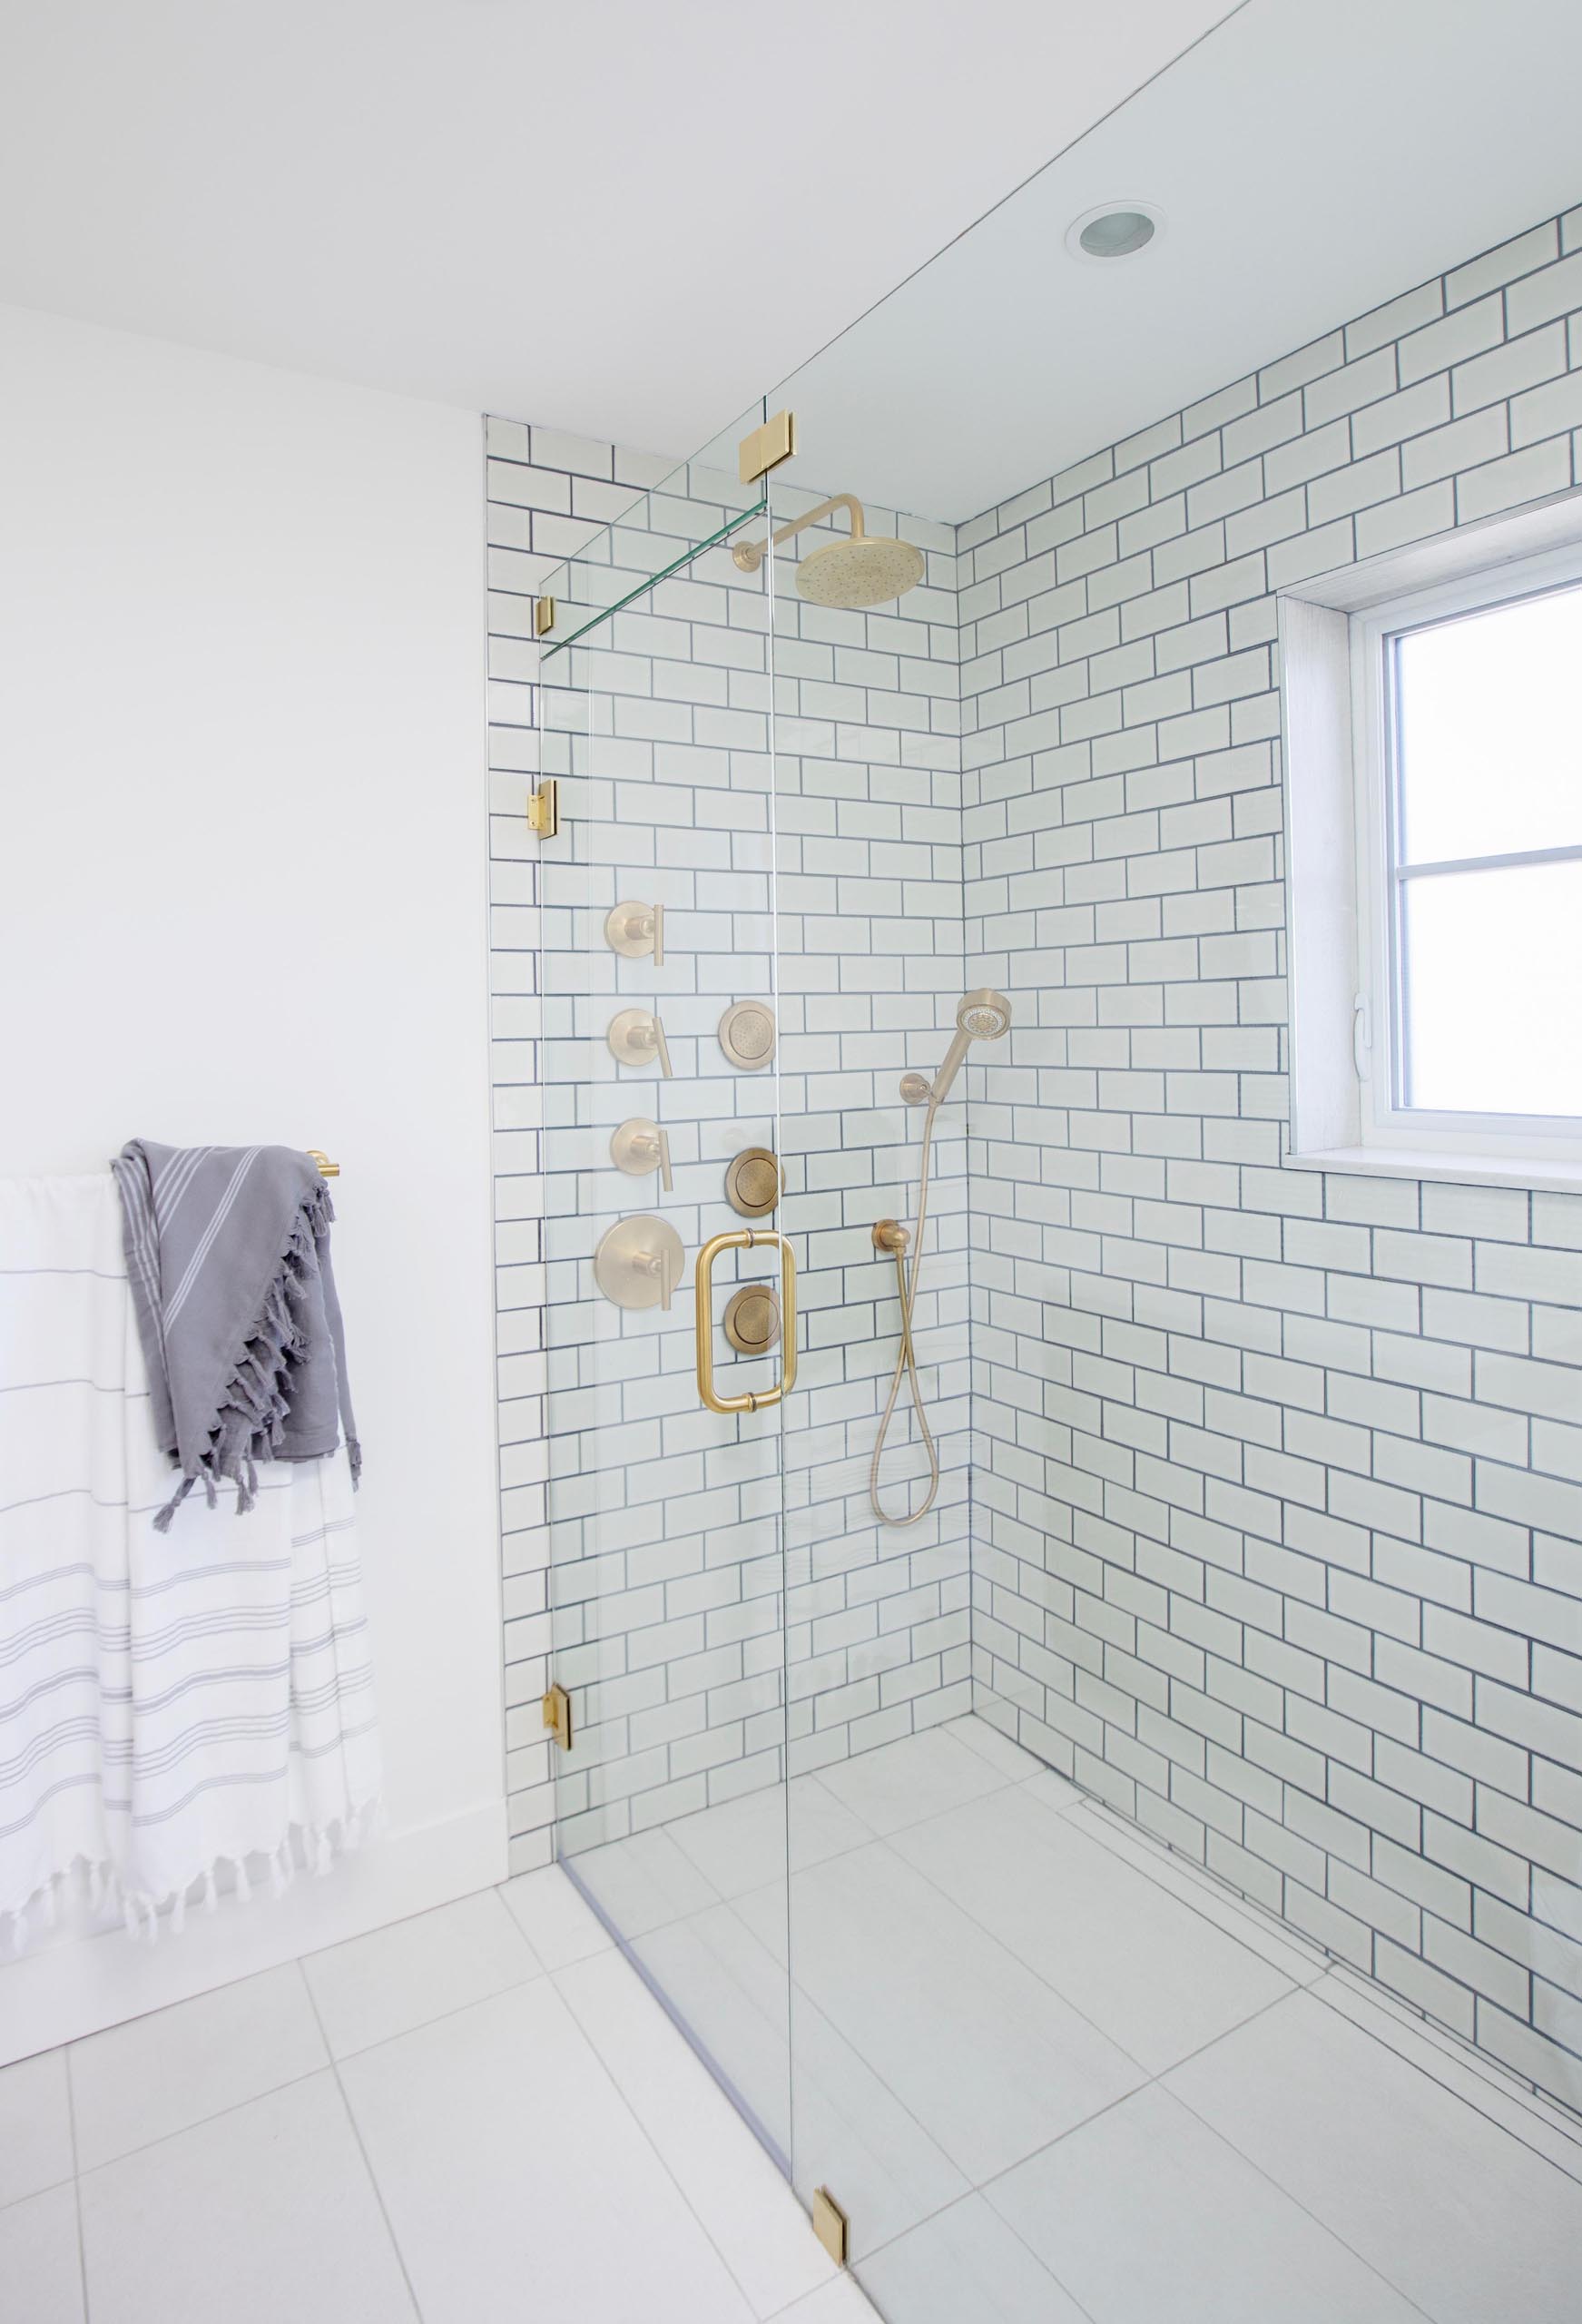 A modern shower with gold hardware, white subway tiles, and contrasting dark grout.